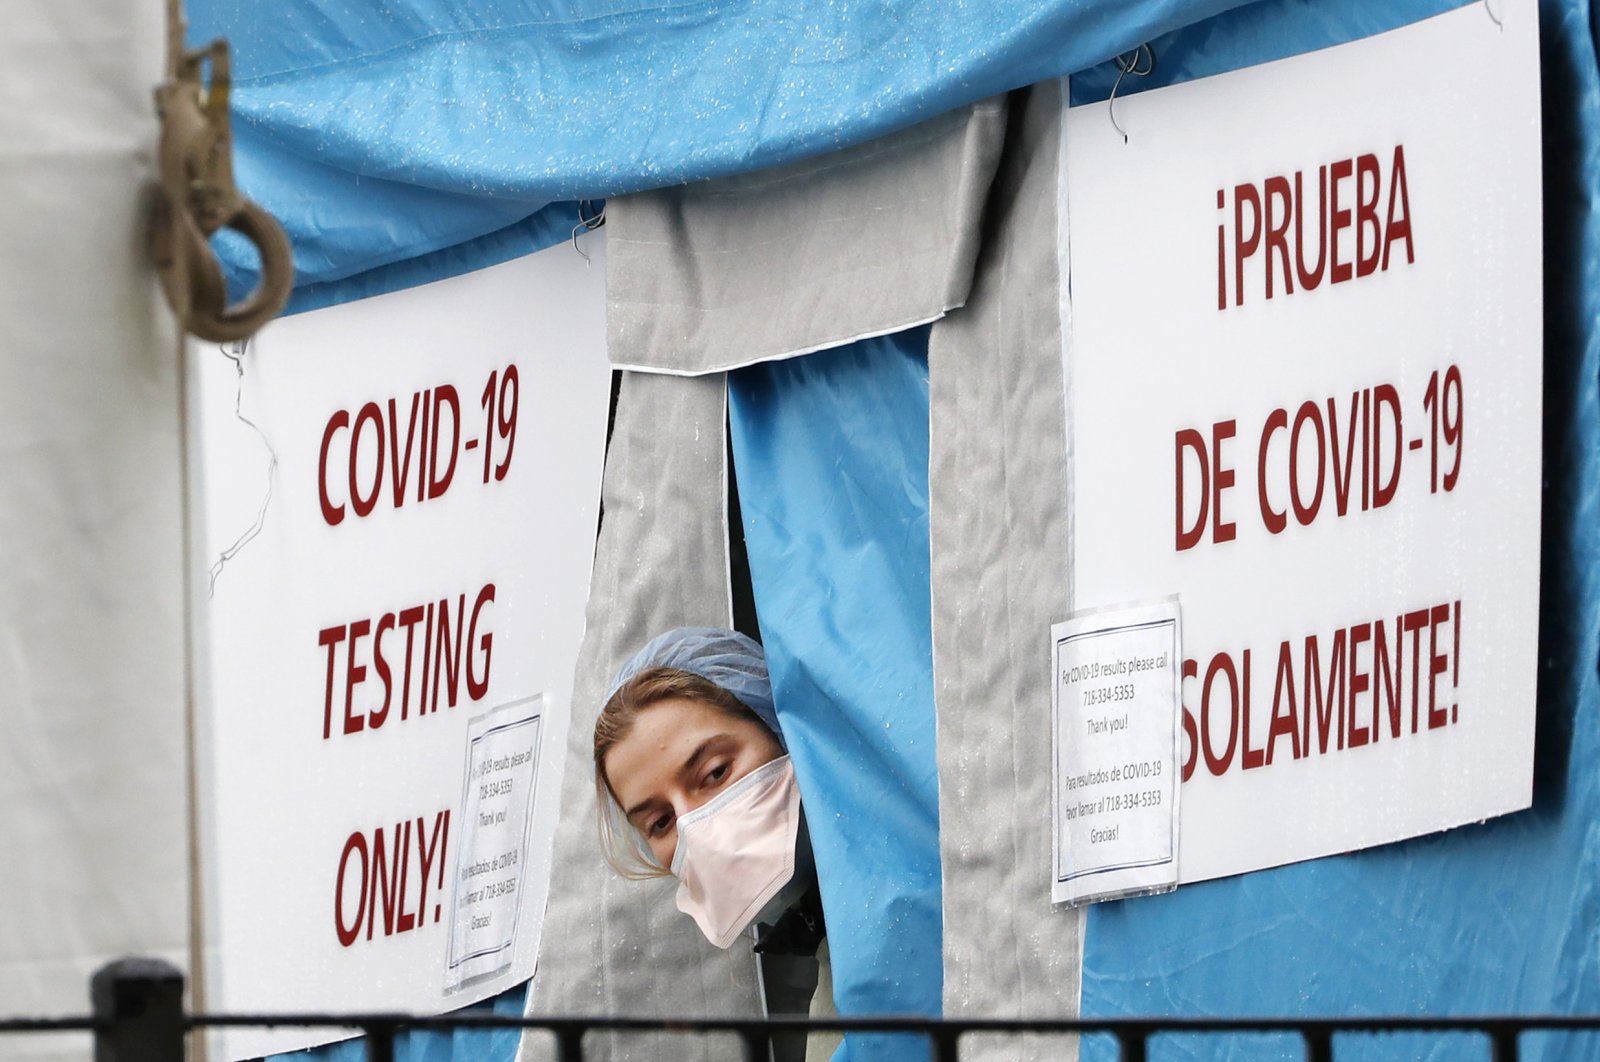 A medical worker sticks her head outside a COVID-19 testing tent set up outside Elmhurst Hospital Center in New York, Saturday, March 28, 2020. (AP Photo)